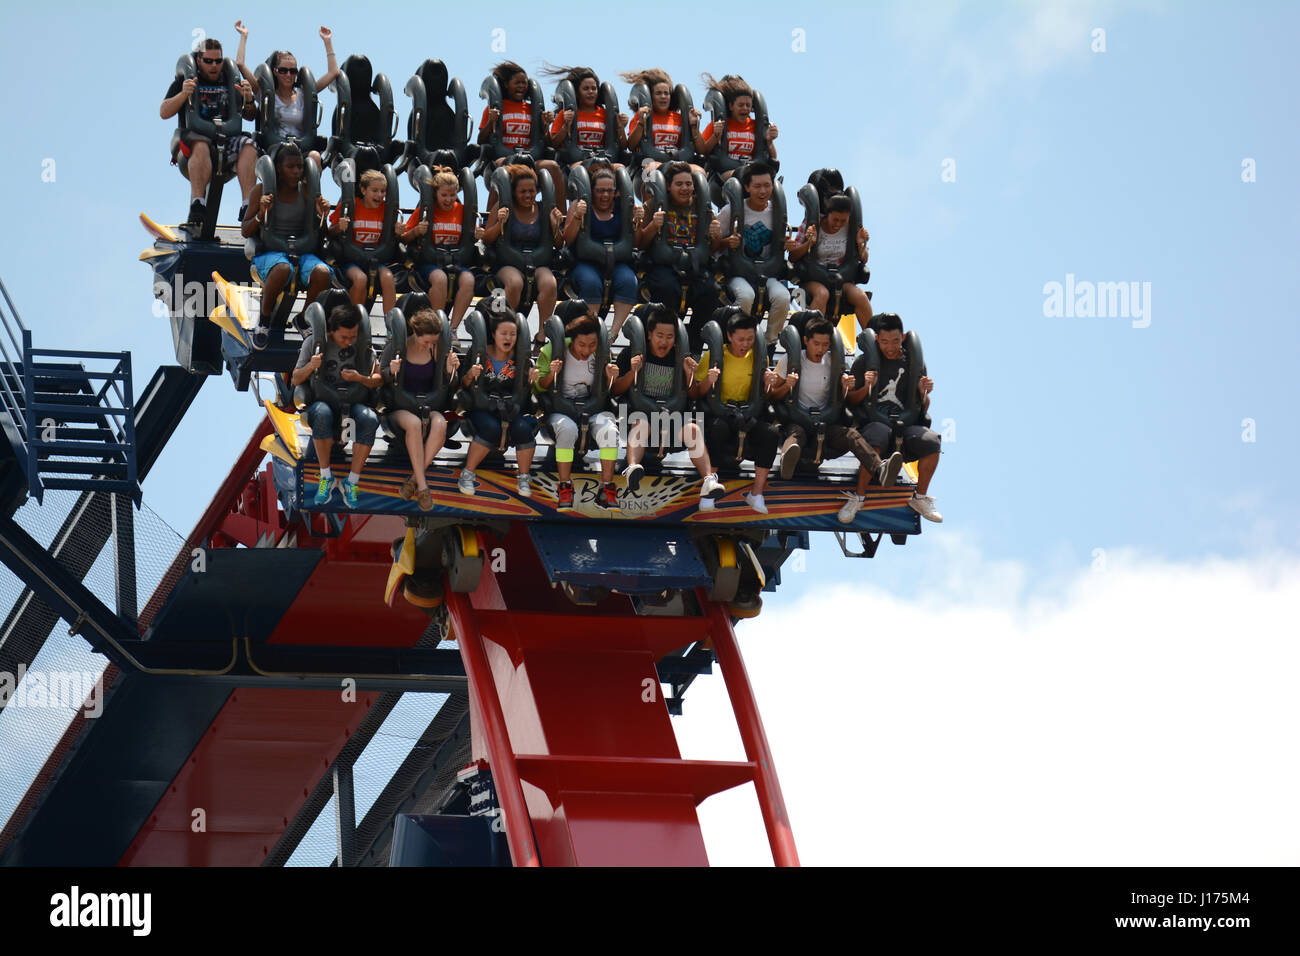 theme park roller coasters full of people wild faces screaming Stock Photo  - Alamy